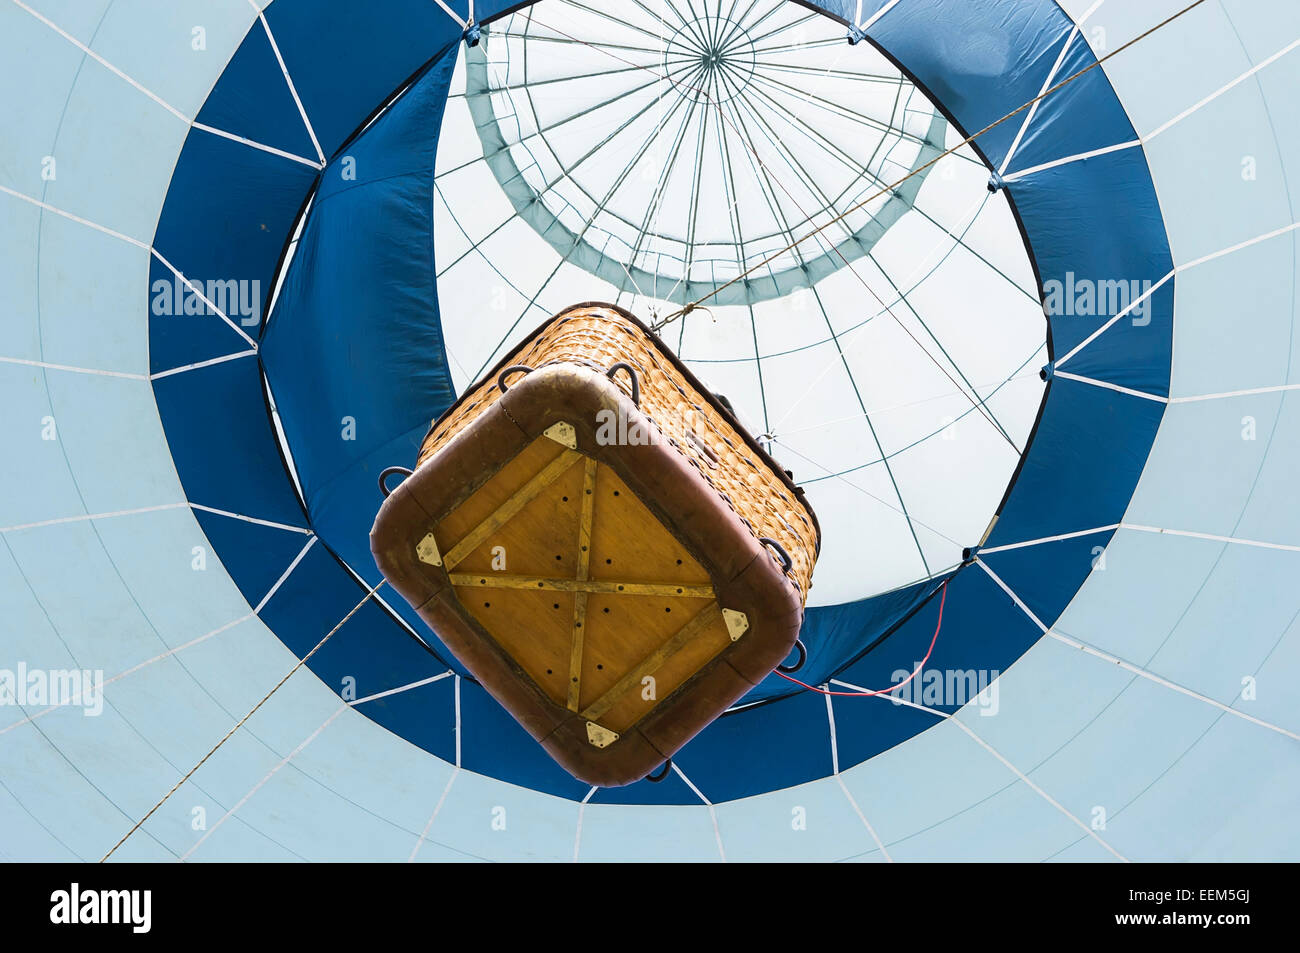 Suspended hot air balloon with passenger carrying basket viewed from below Stock Photo